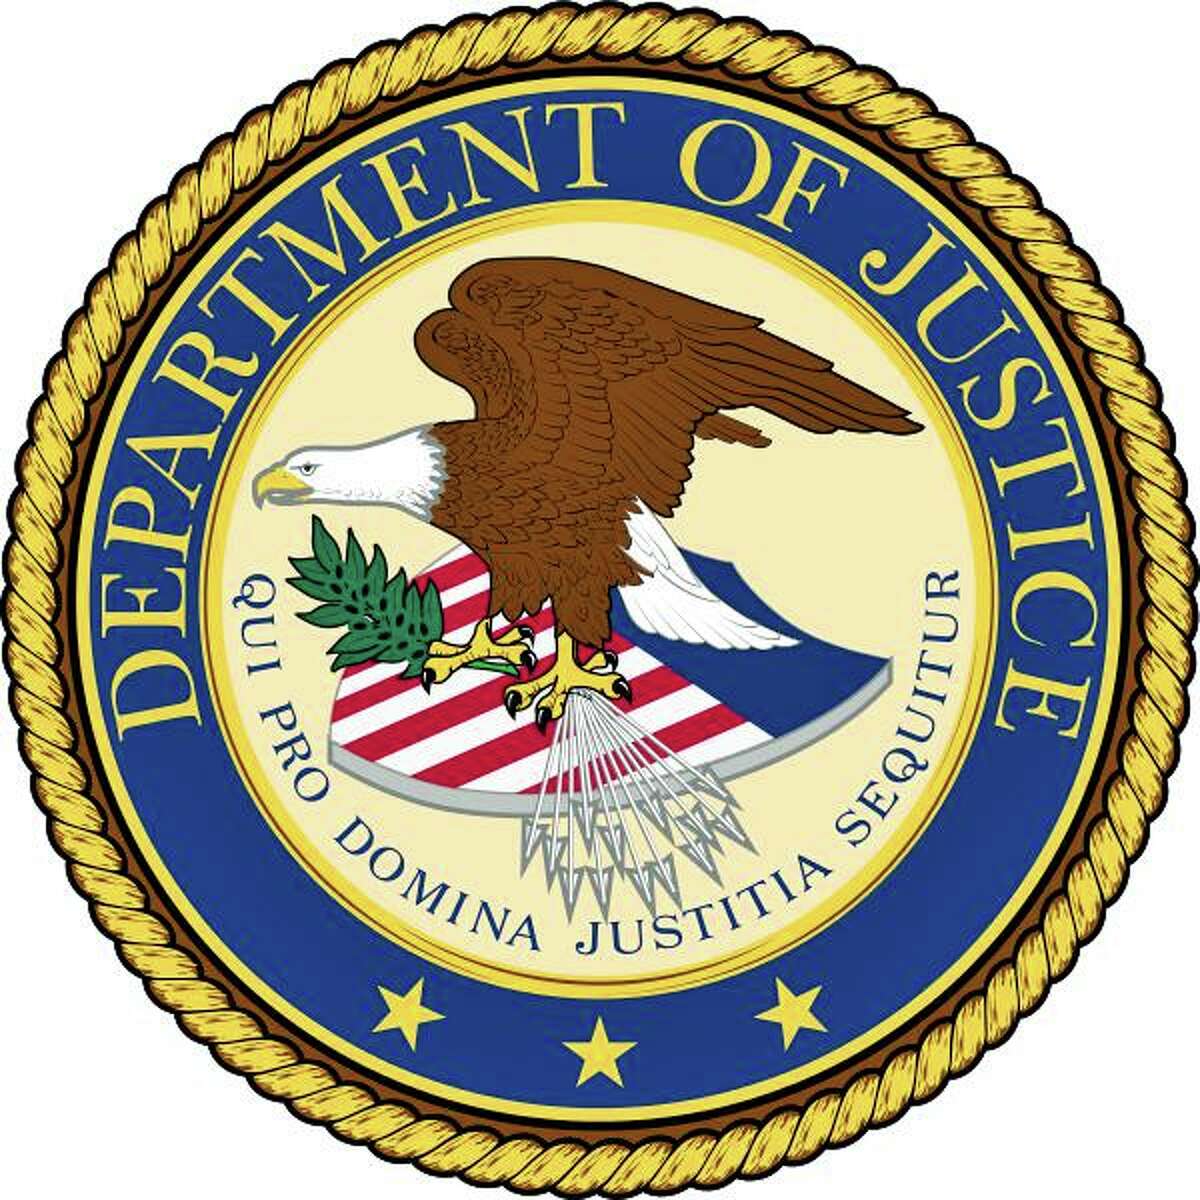 A 54-year-old Providence, R.I. man has been indicted in connection with theft of tires and rims from numerous luxury vehicles in Connecticut and three other states, federal prosecutors said. Michael Farias was indicted by a federal grand jury in New Haven “with offenses related to his alleged role in a scheme to steal tires and rims from new vehicles at car dealerships in northeastern states and then sell the stolen items to individuals across the”country,” prosecutors announced Tuesday.